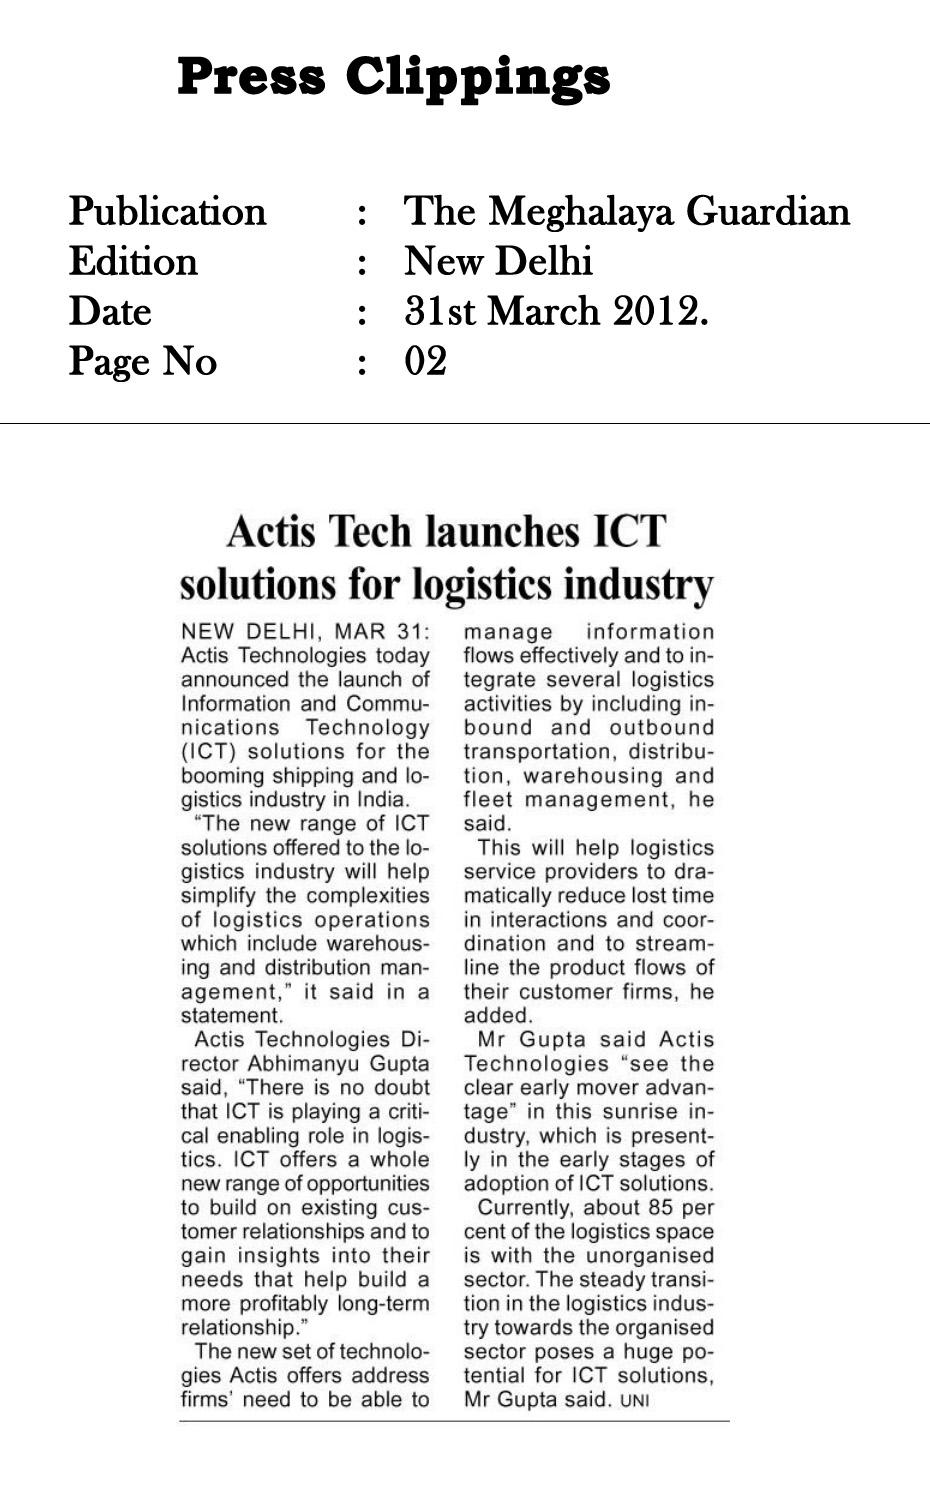 Actis Tech Launches ICT solutions for Logistics Industry - The Meghalaya Guardian